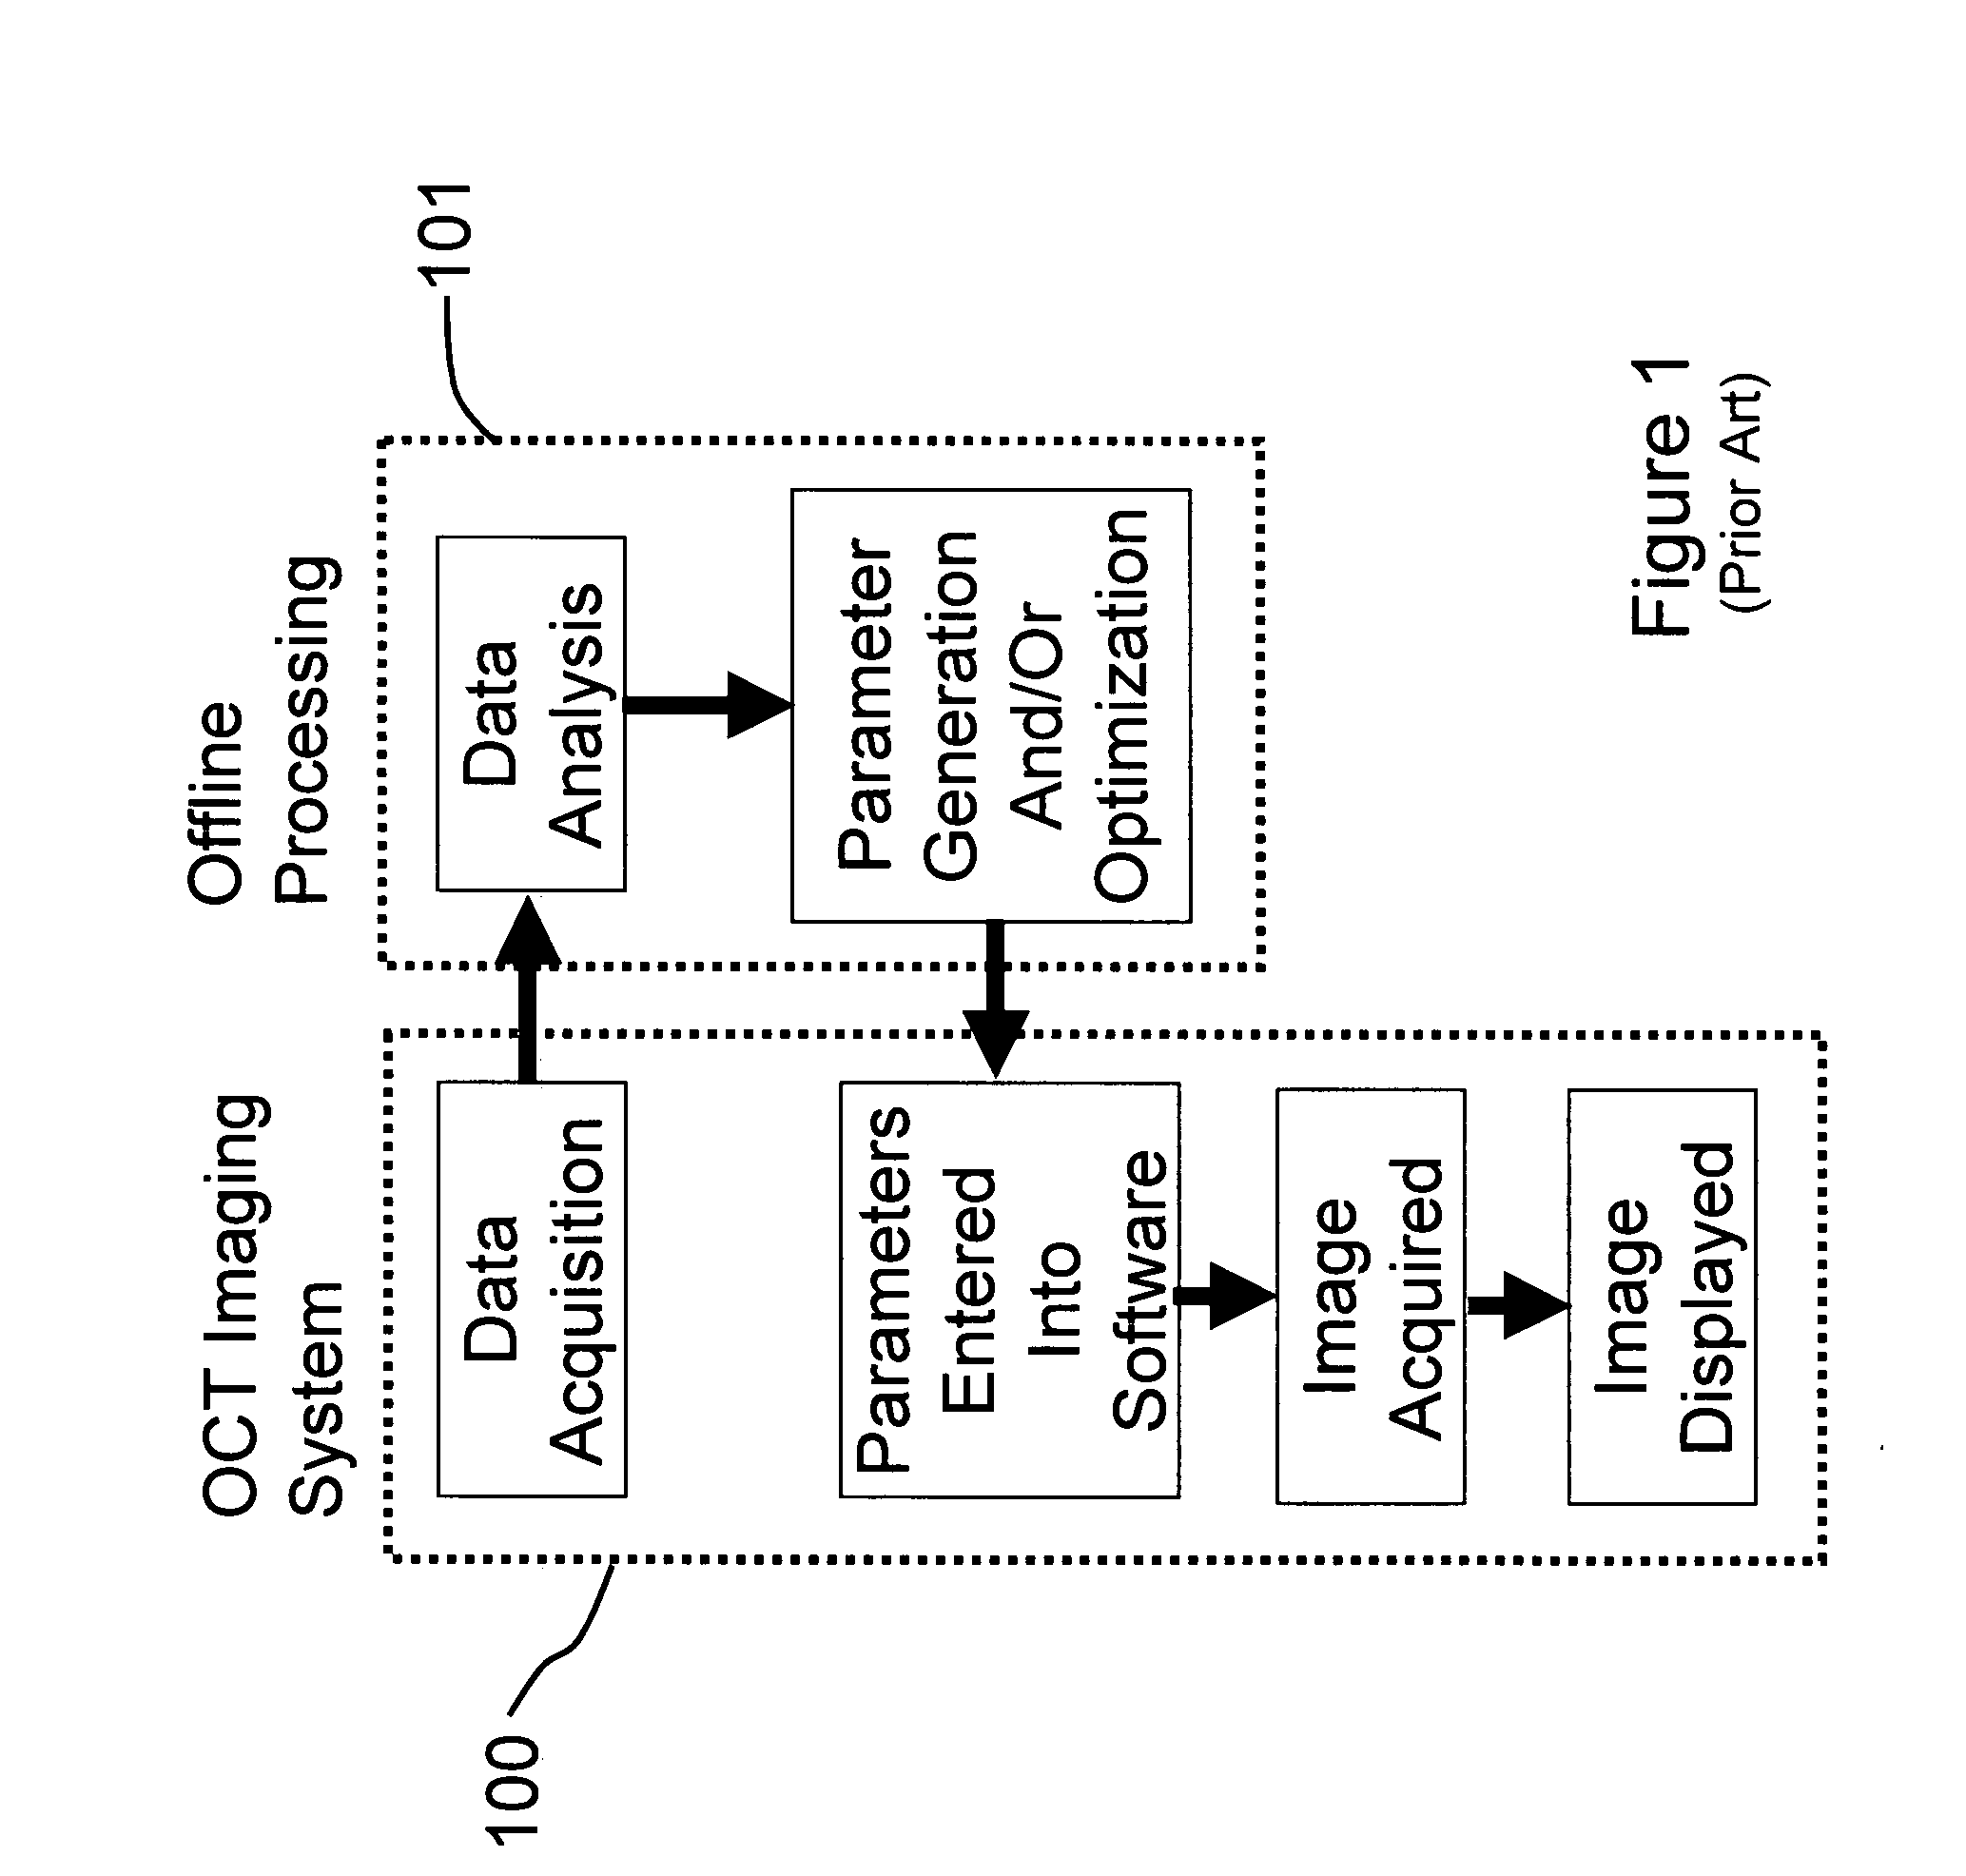 Methods, systems and computer program products for optical coherence tomography (OCT) using automatic dispersion compensation